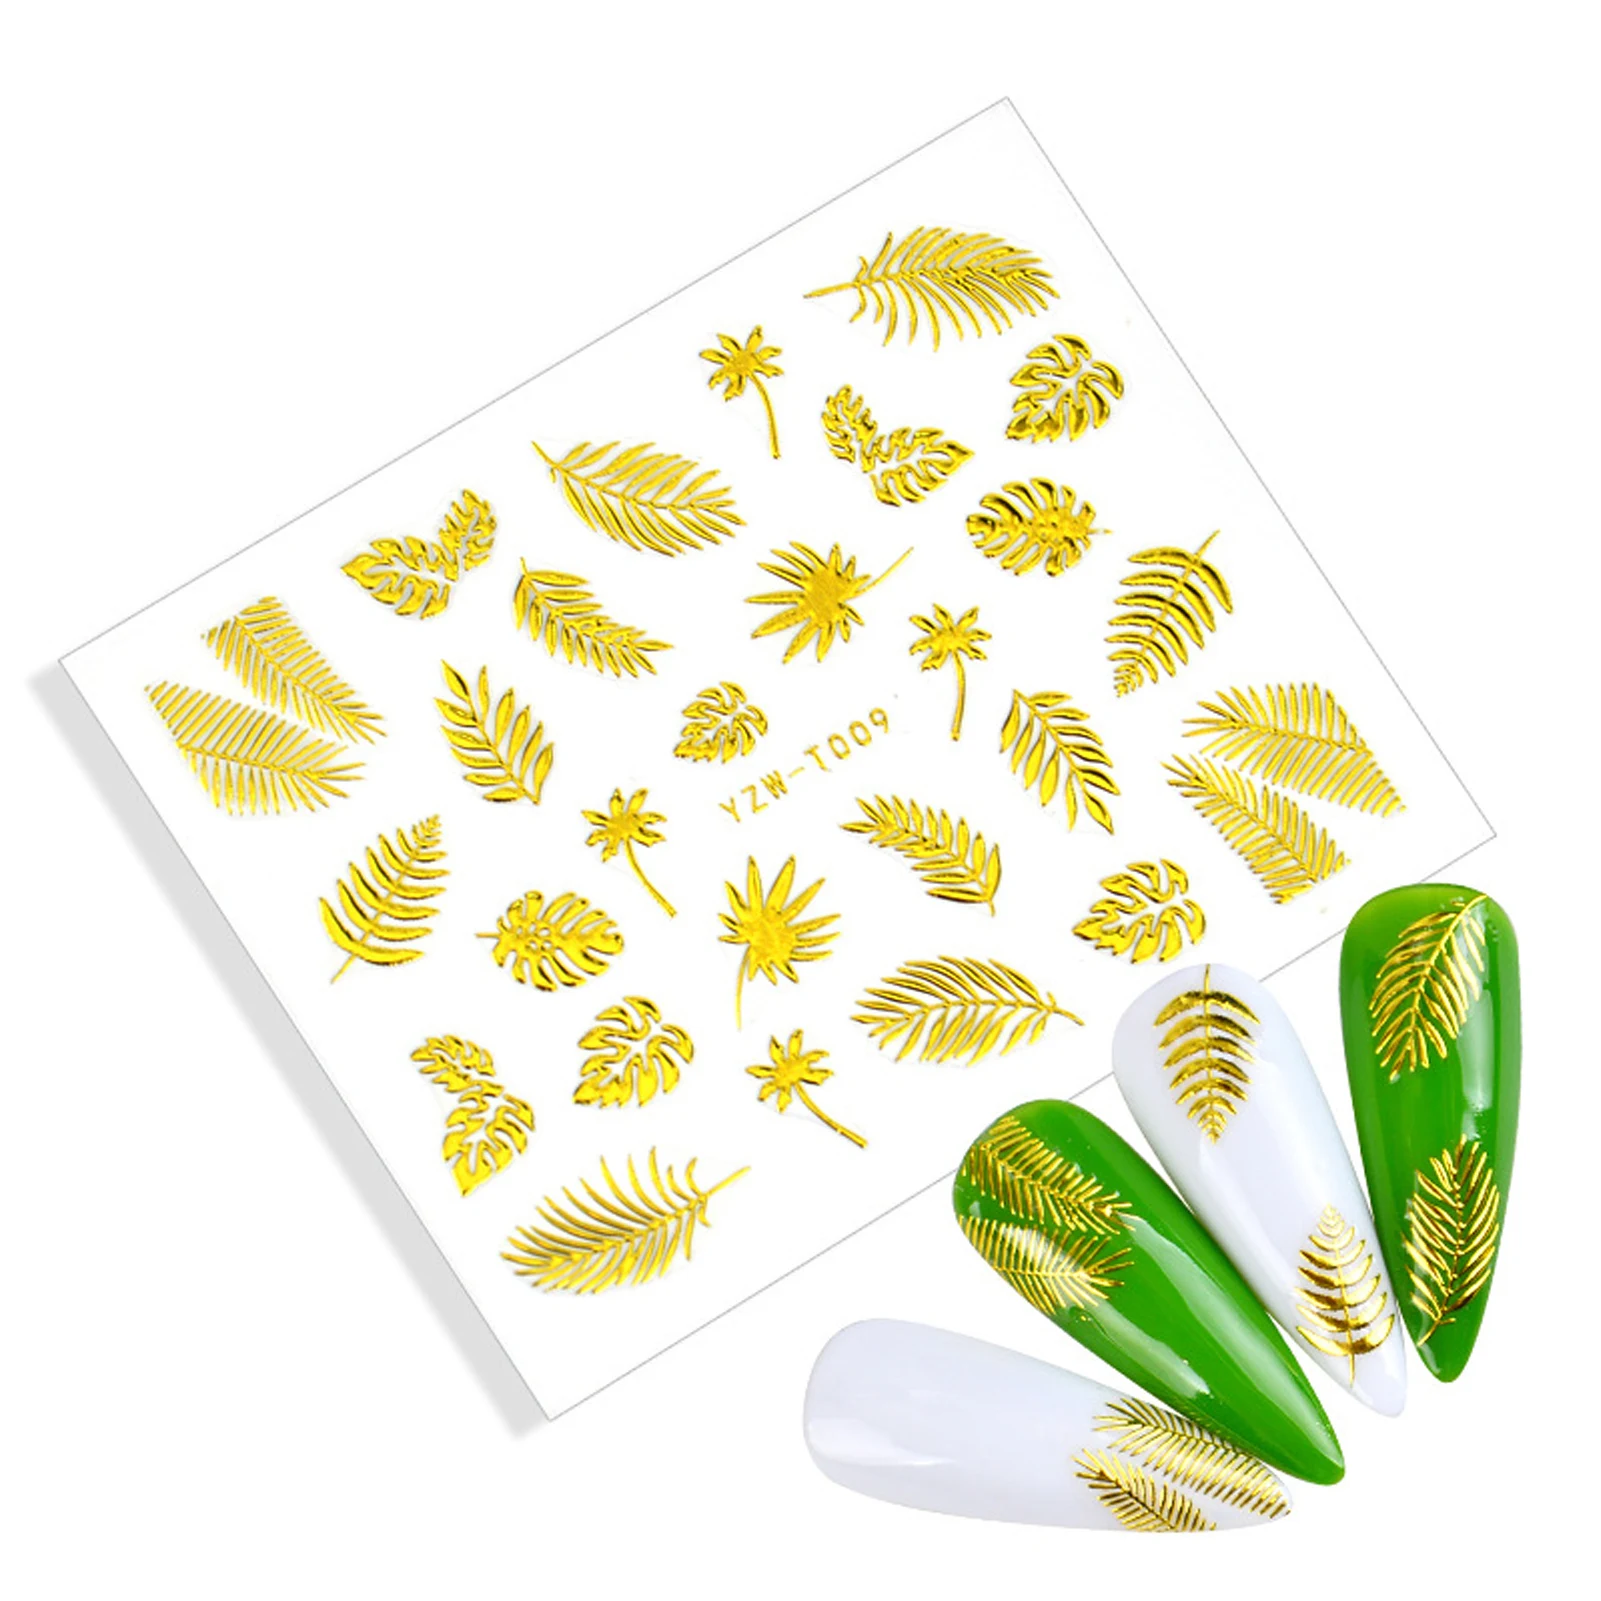 

1 Pcs Gold Bronzing Leaf Nail Stickers 3D Russian Flowers Geometry Wave Lines Self Adhesive Sliders Paper Nail Decals Manicures